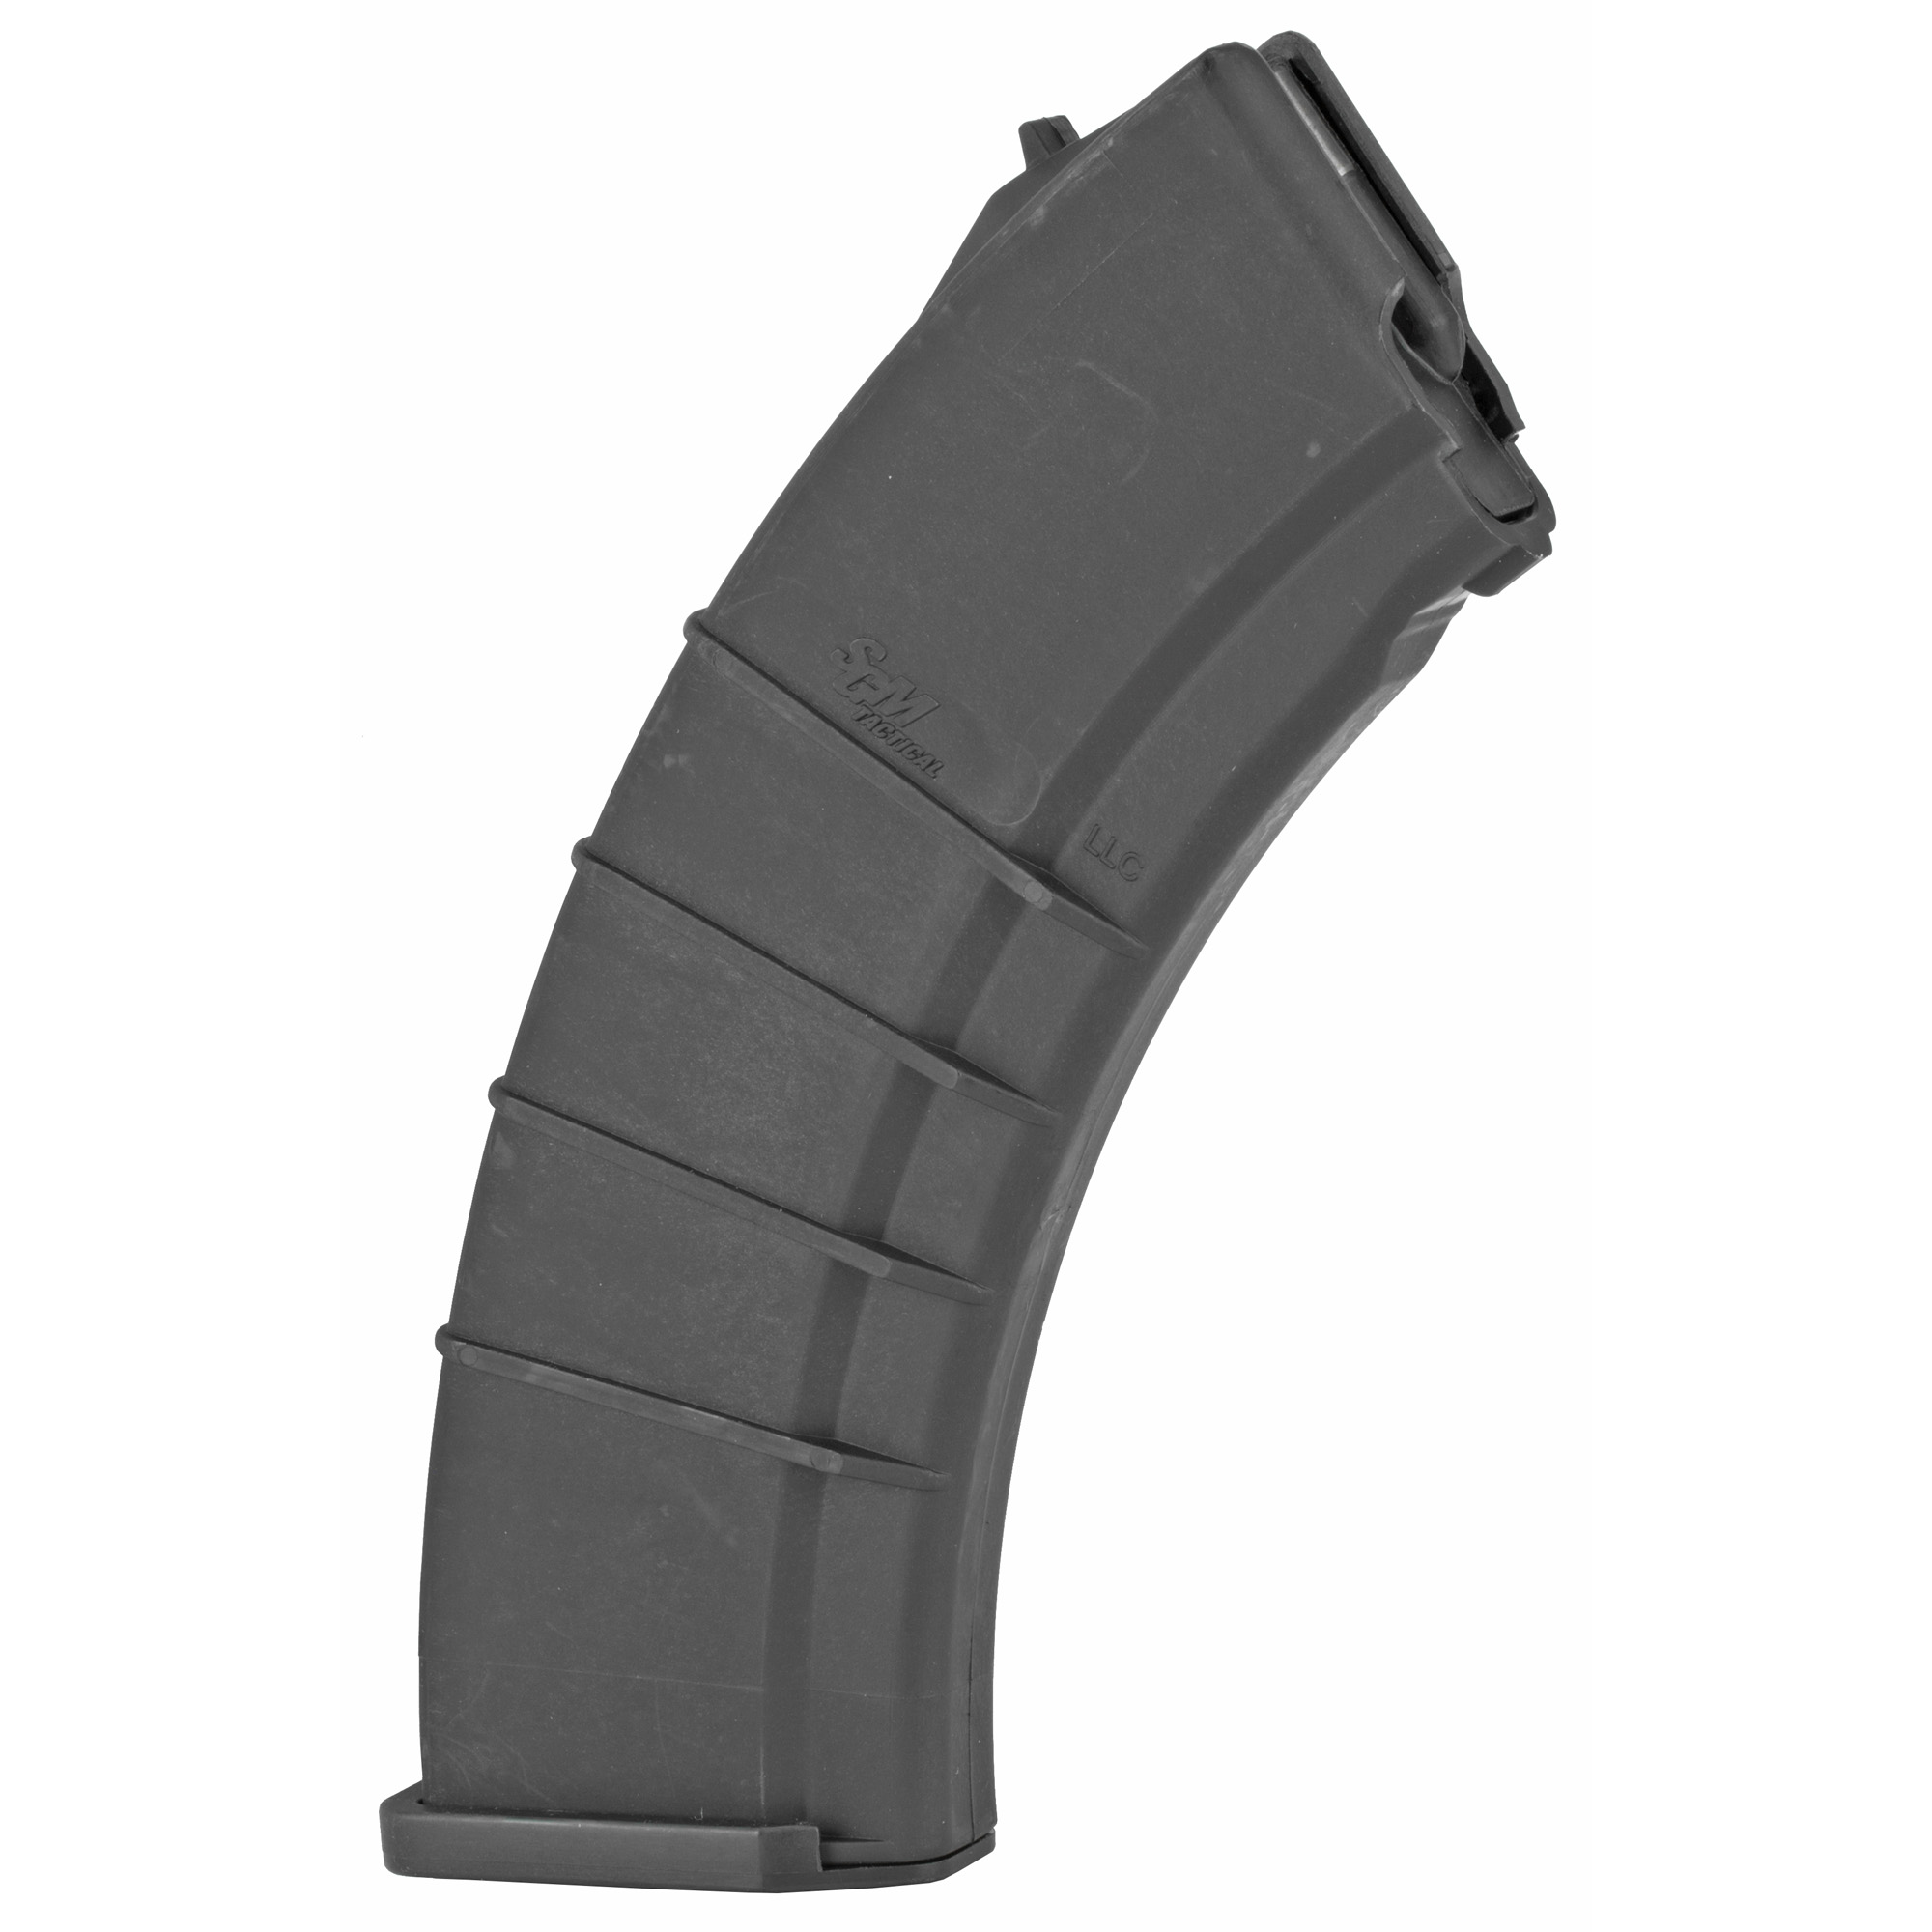 SGM Tactical Vepr Rifle Magazine 7.62x39mm 30 Rounds SGMT7623 Free Ship!-img-1